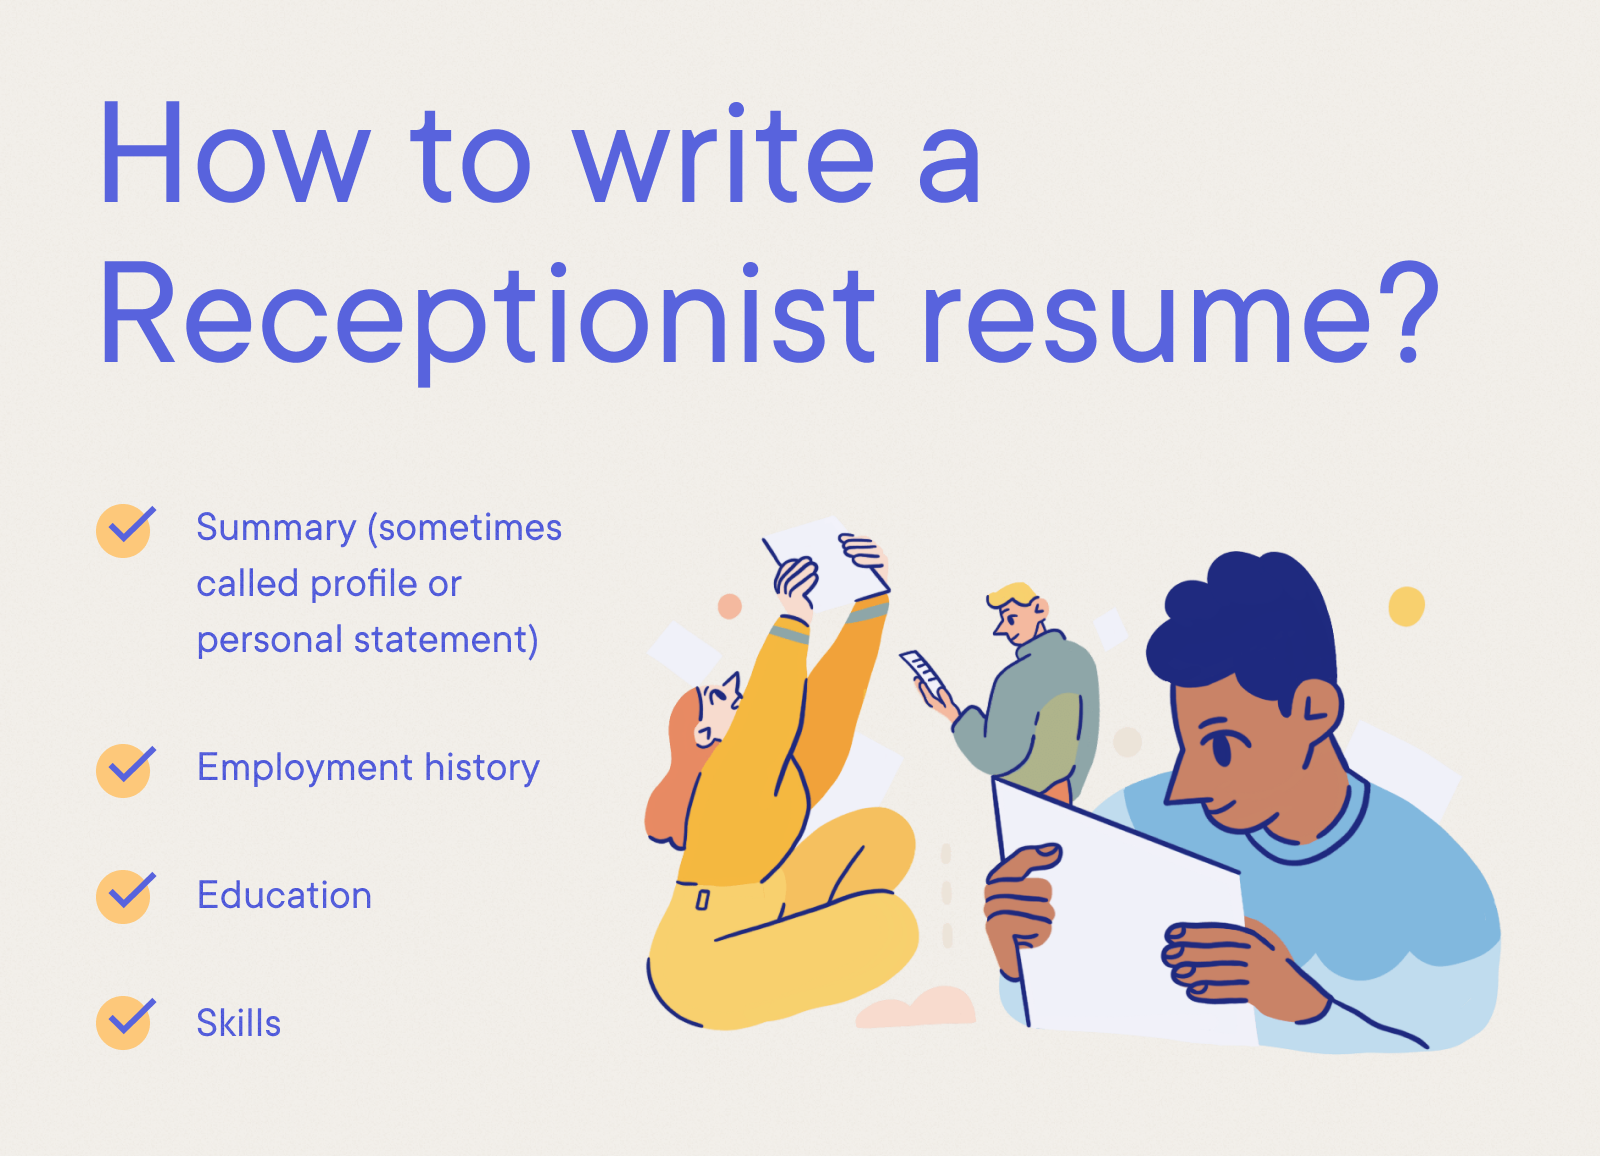 Receptionist Resume Example - How to write a Receptionist resume?